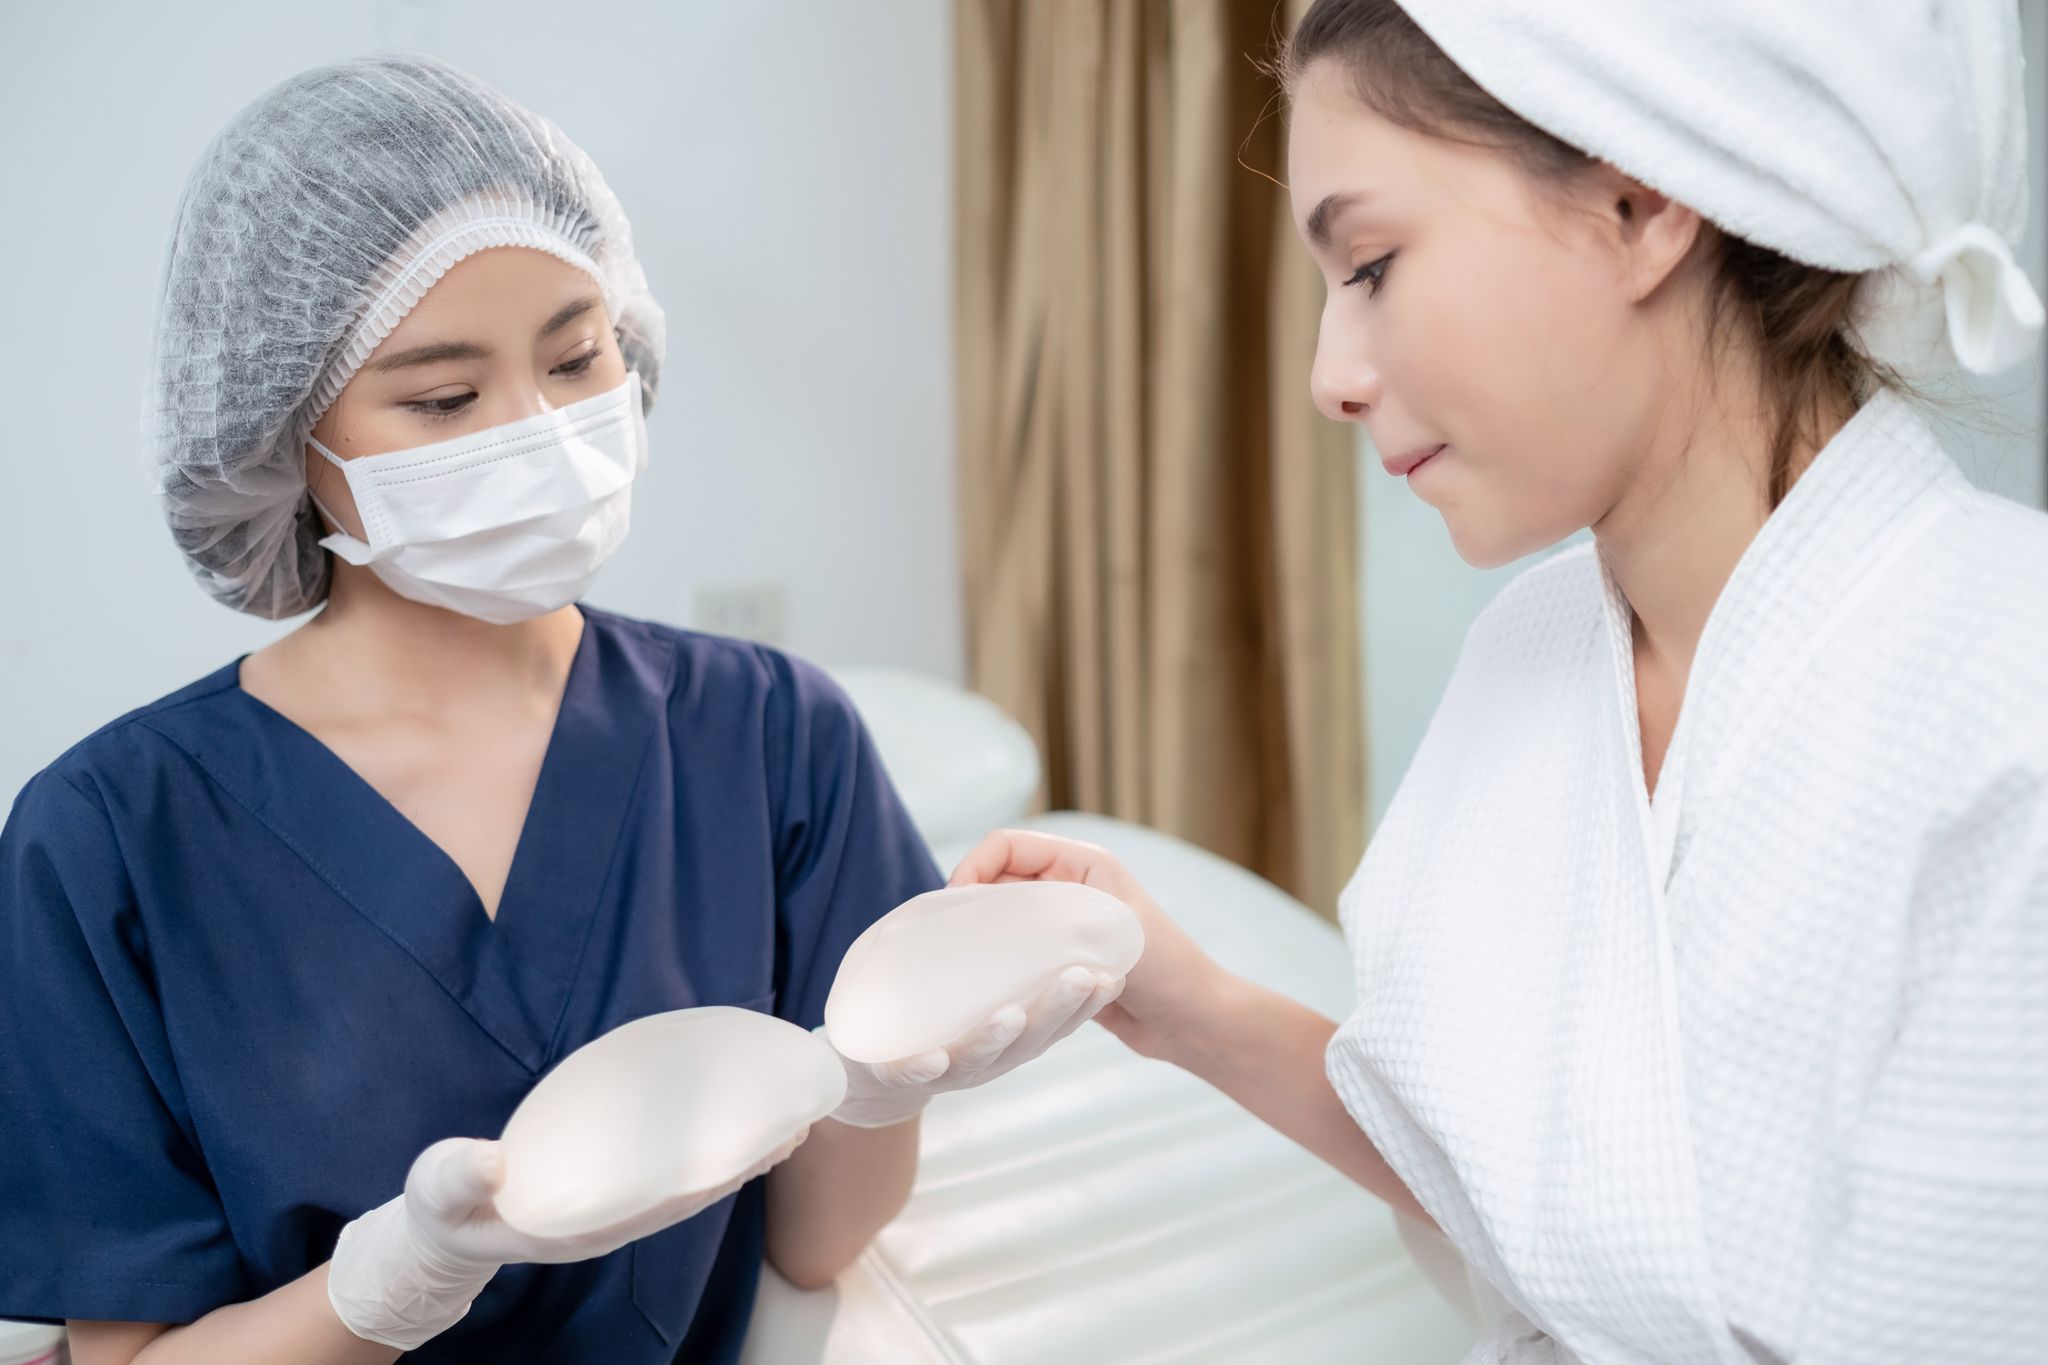 Key points to consider about breast reconstruction following a mastectomy